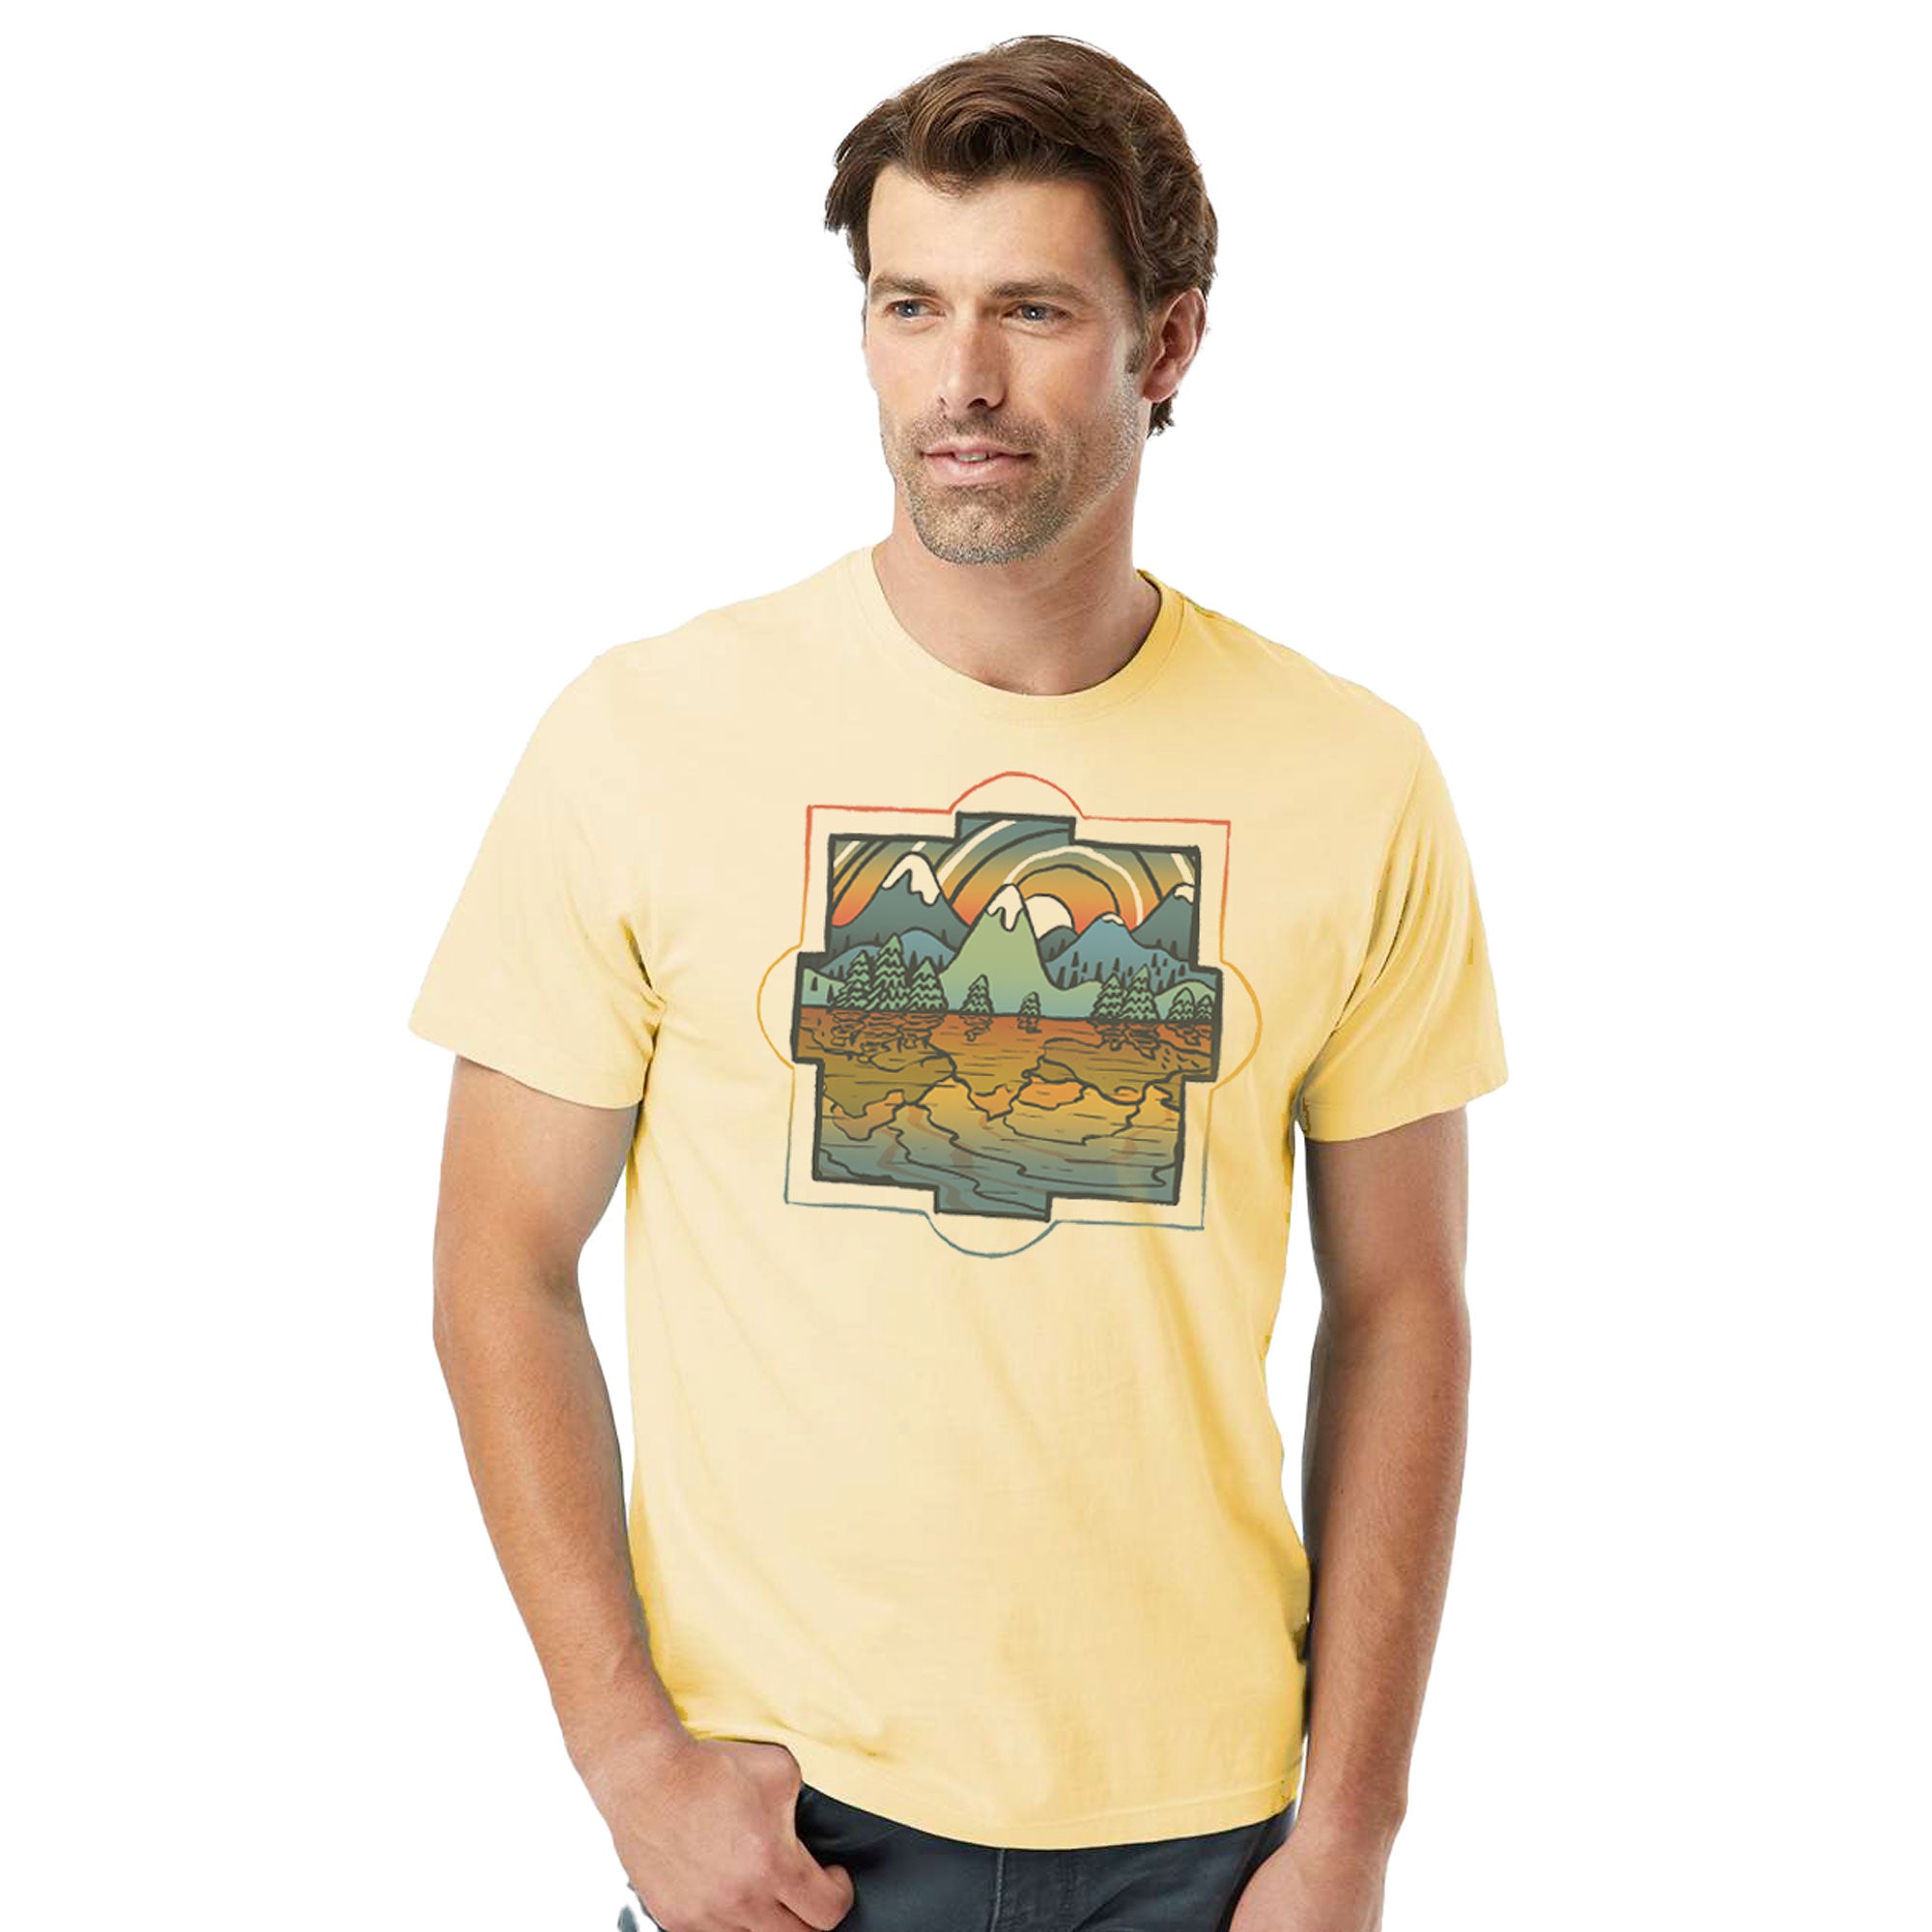 Reflections | Design By Dylan Fant Cool Organic Cotton T-shirt | Vintage Artsy Landscape Tee | Solid Threads